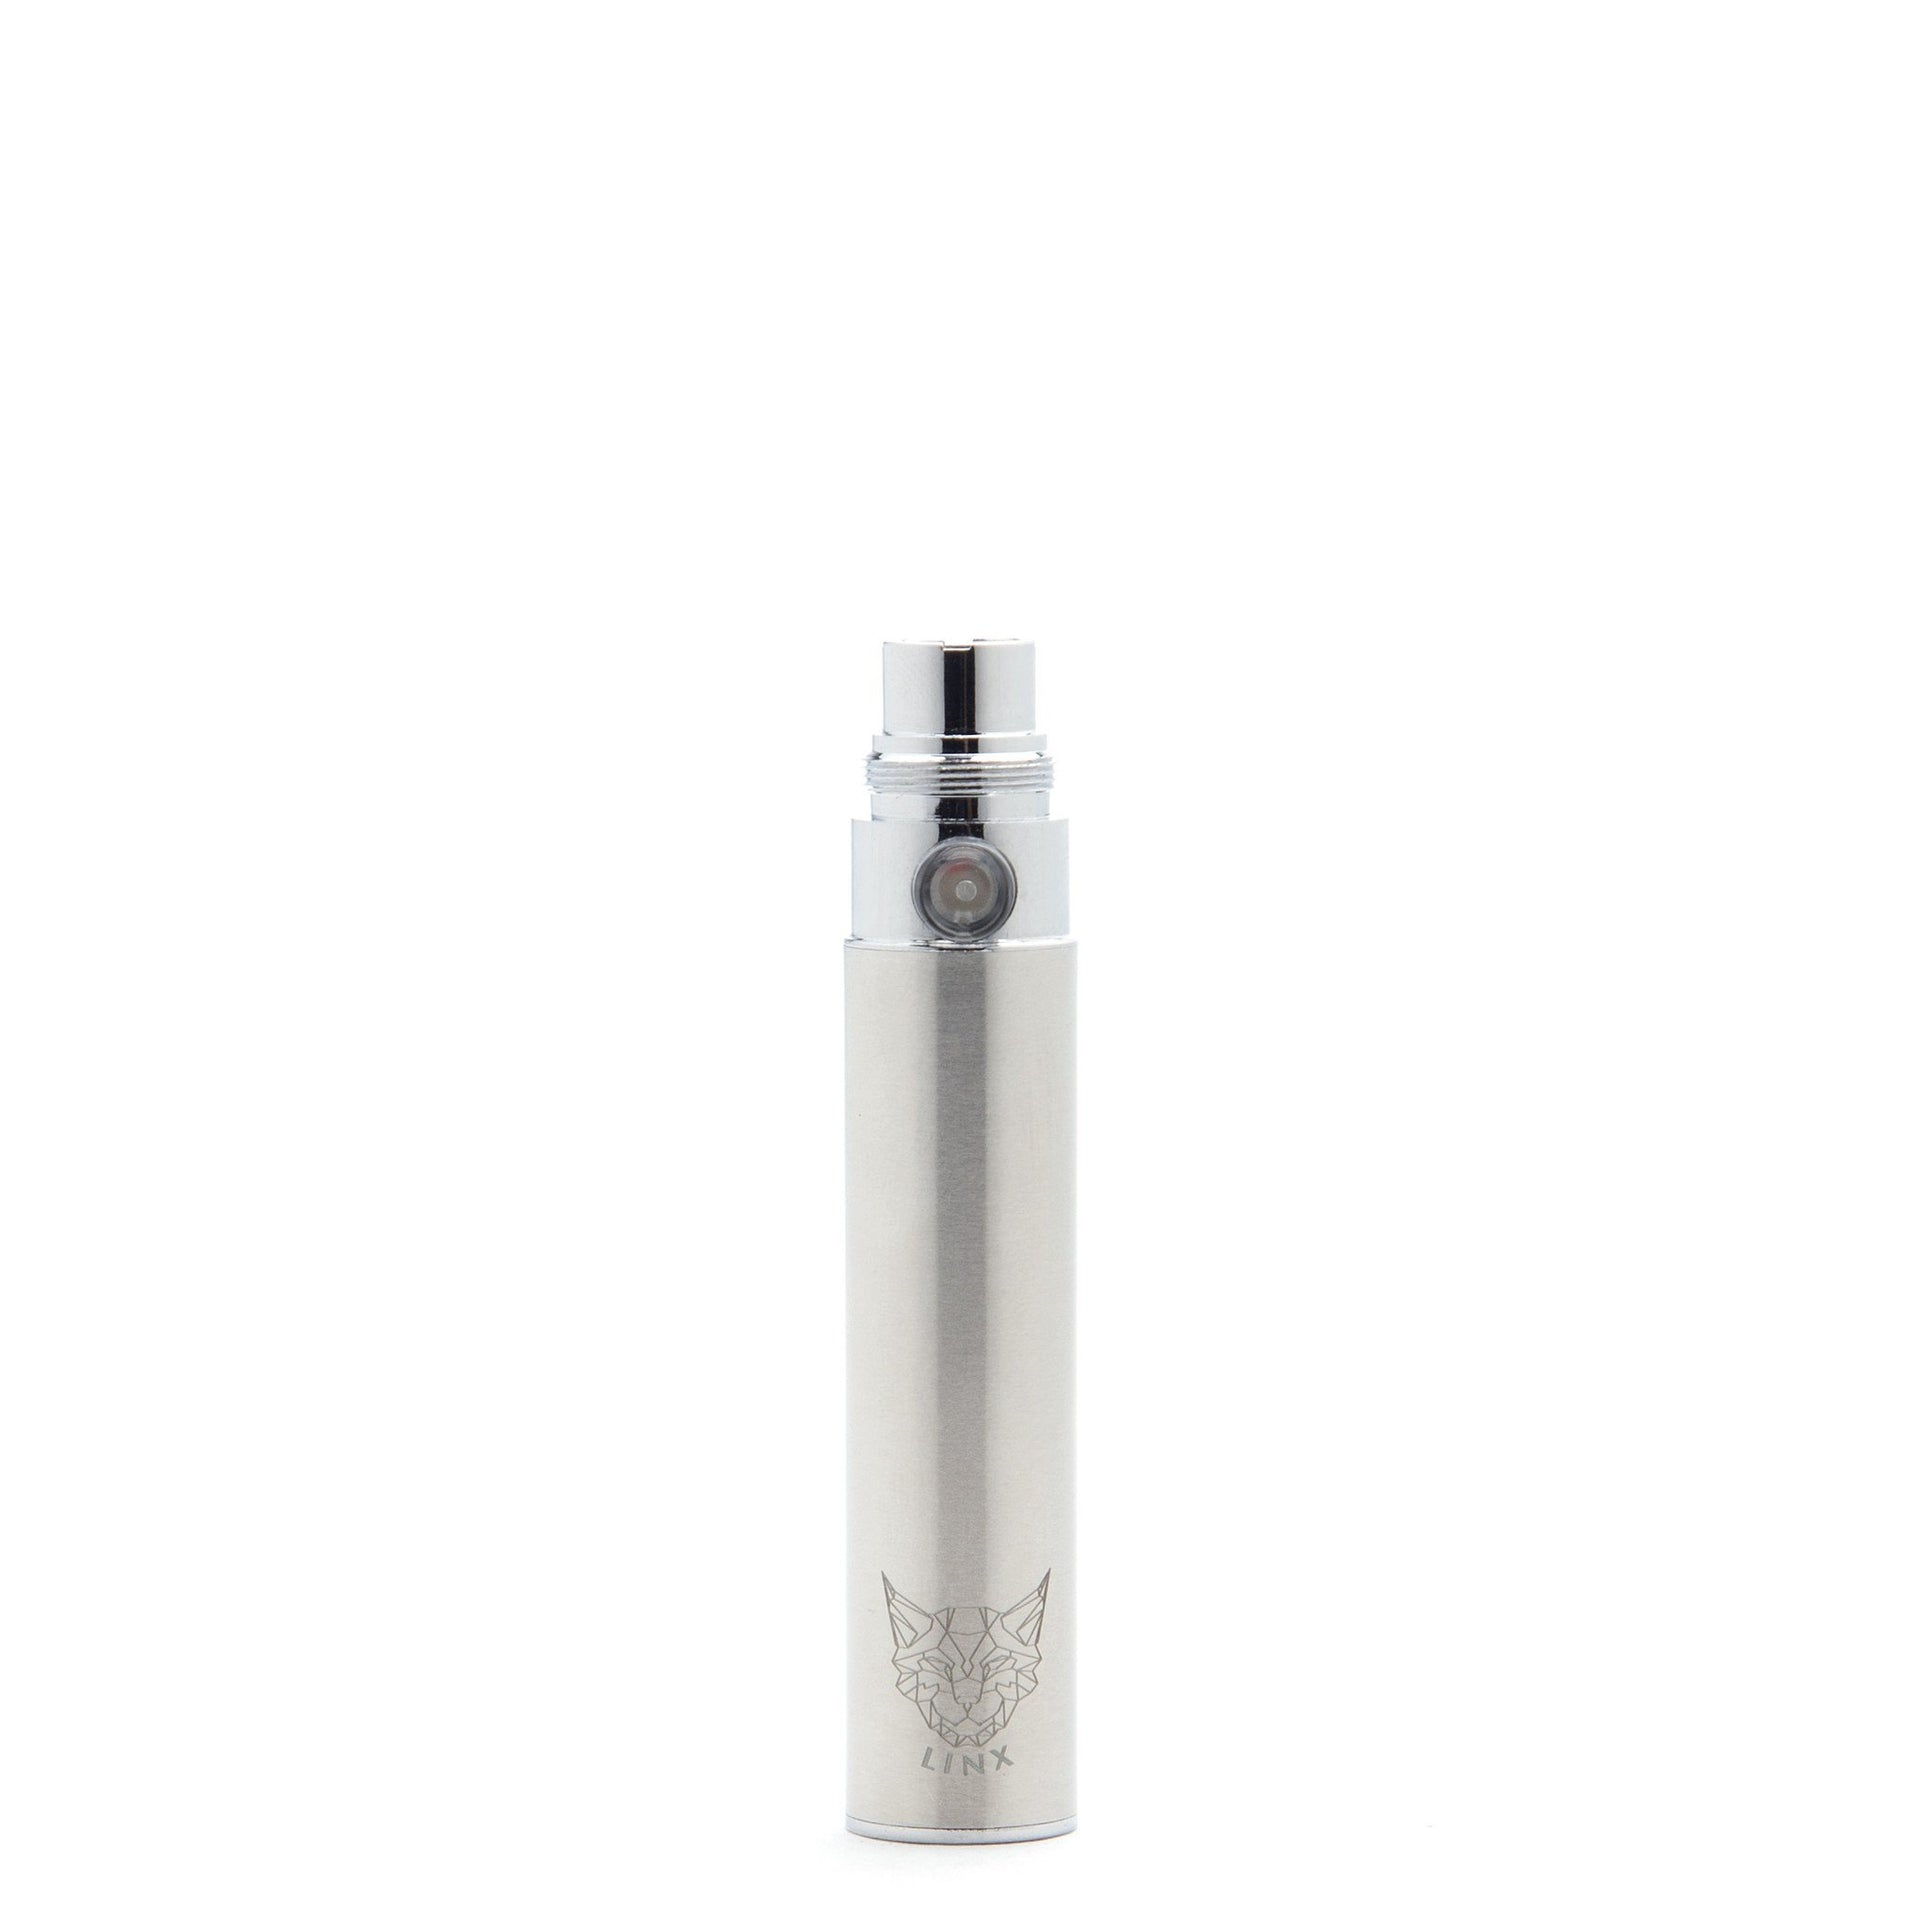 LINX Hypnos Zero Battery - 420 Science - The most trusted online smoke shop.